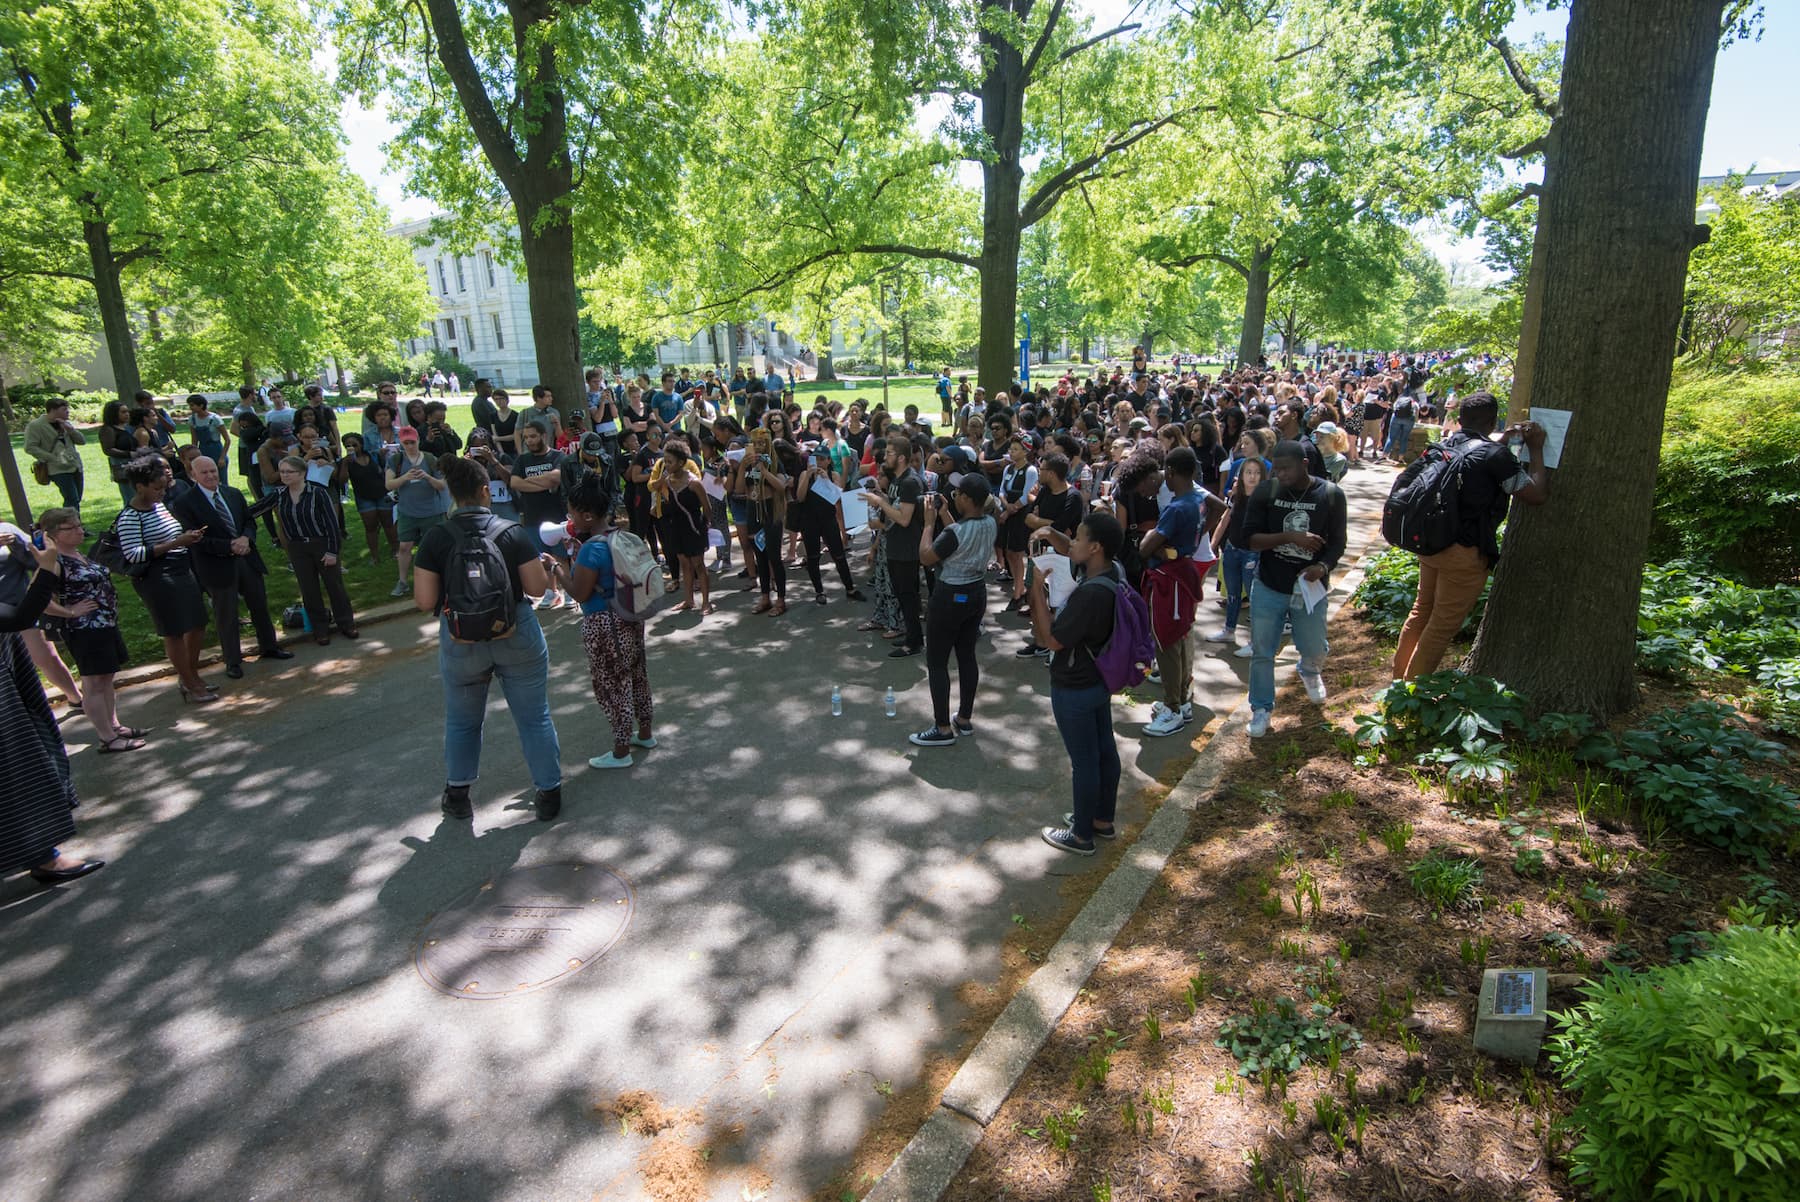 Students gather to organize a protest on campus.